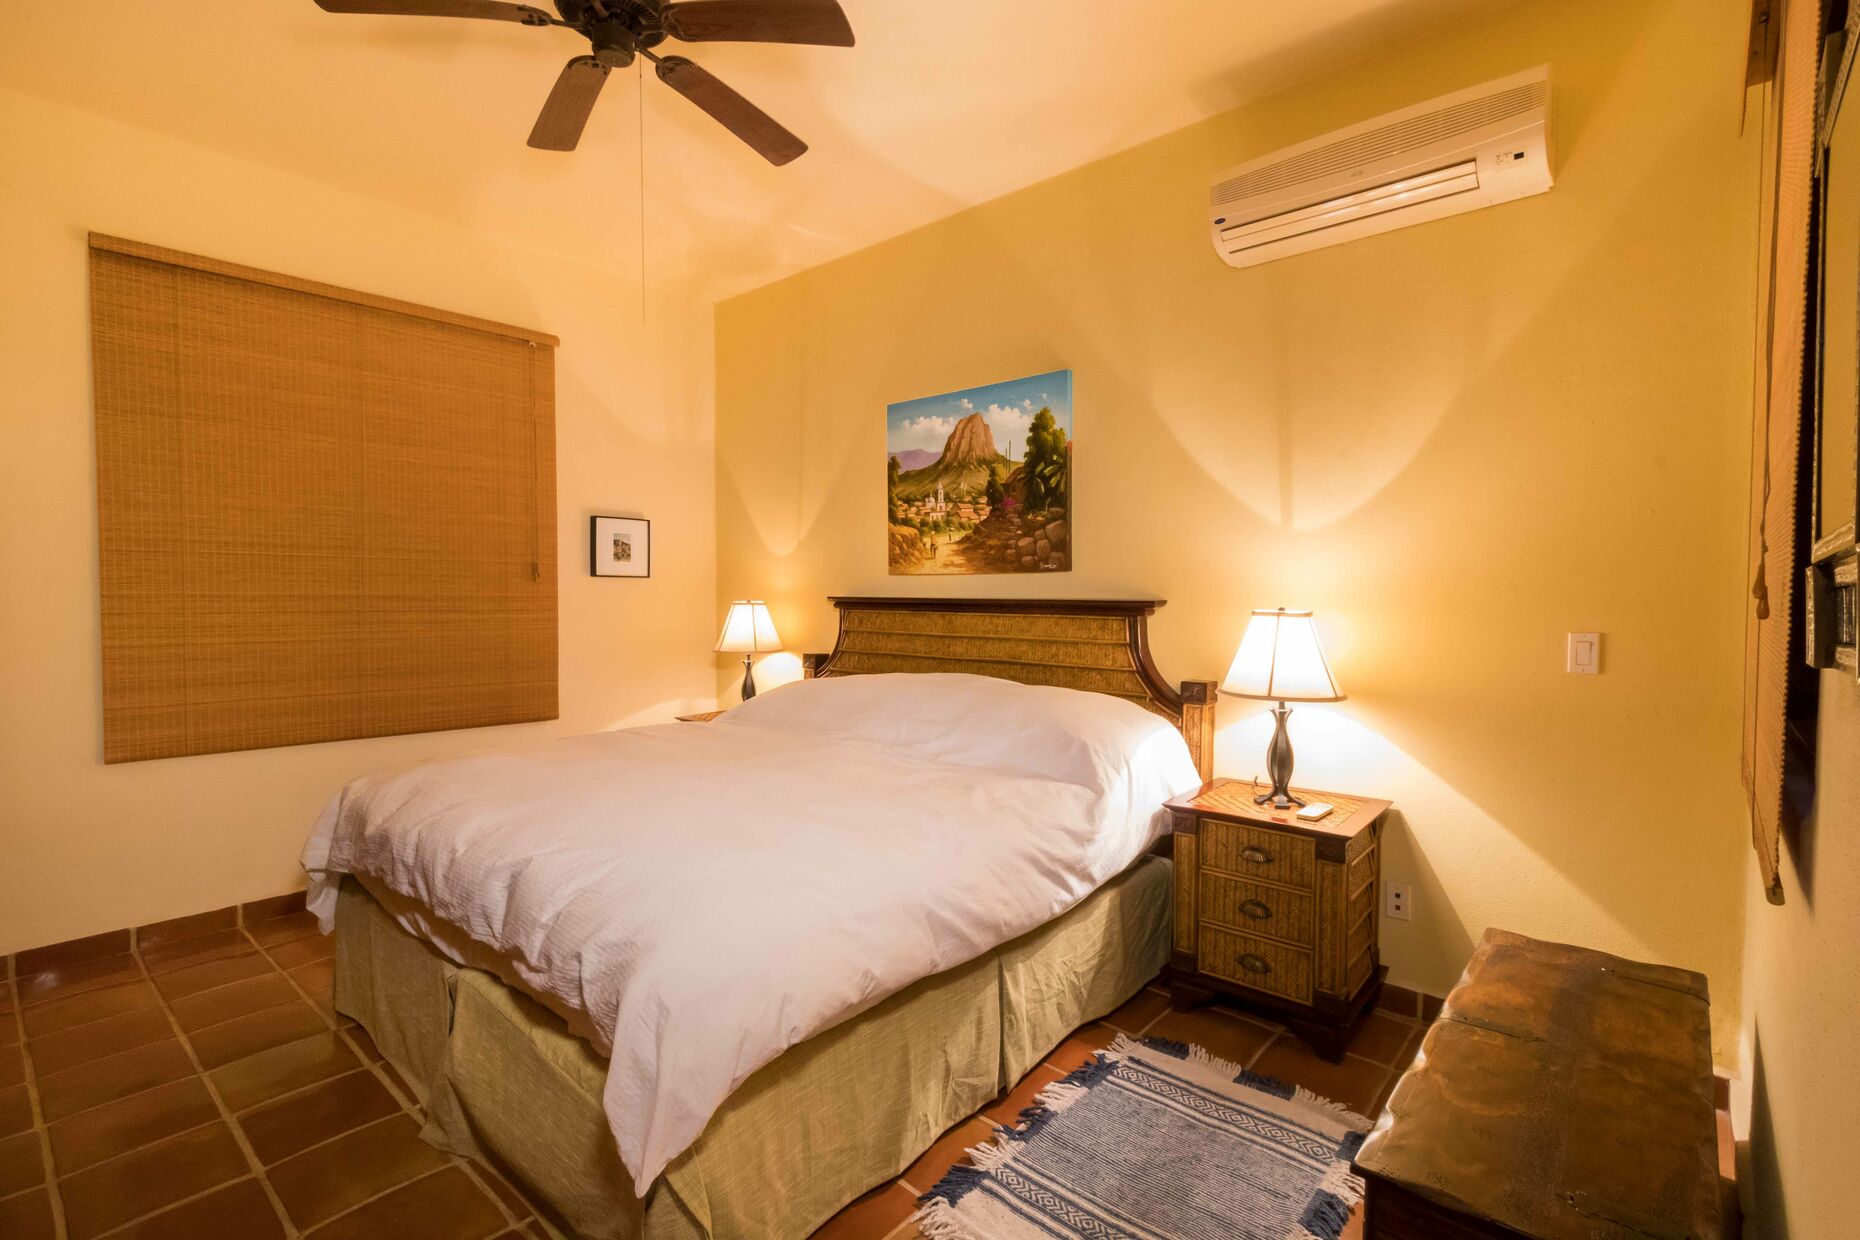 Downstairs Bedroom / King Size Bed / AC / Ceiling Fan